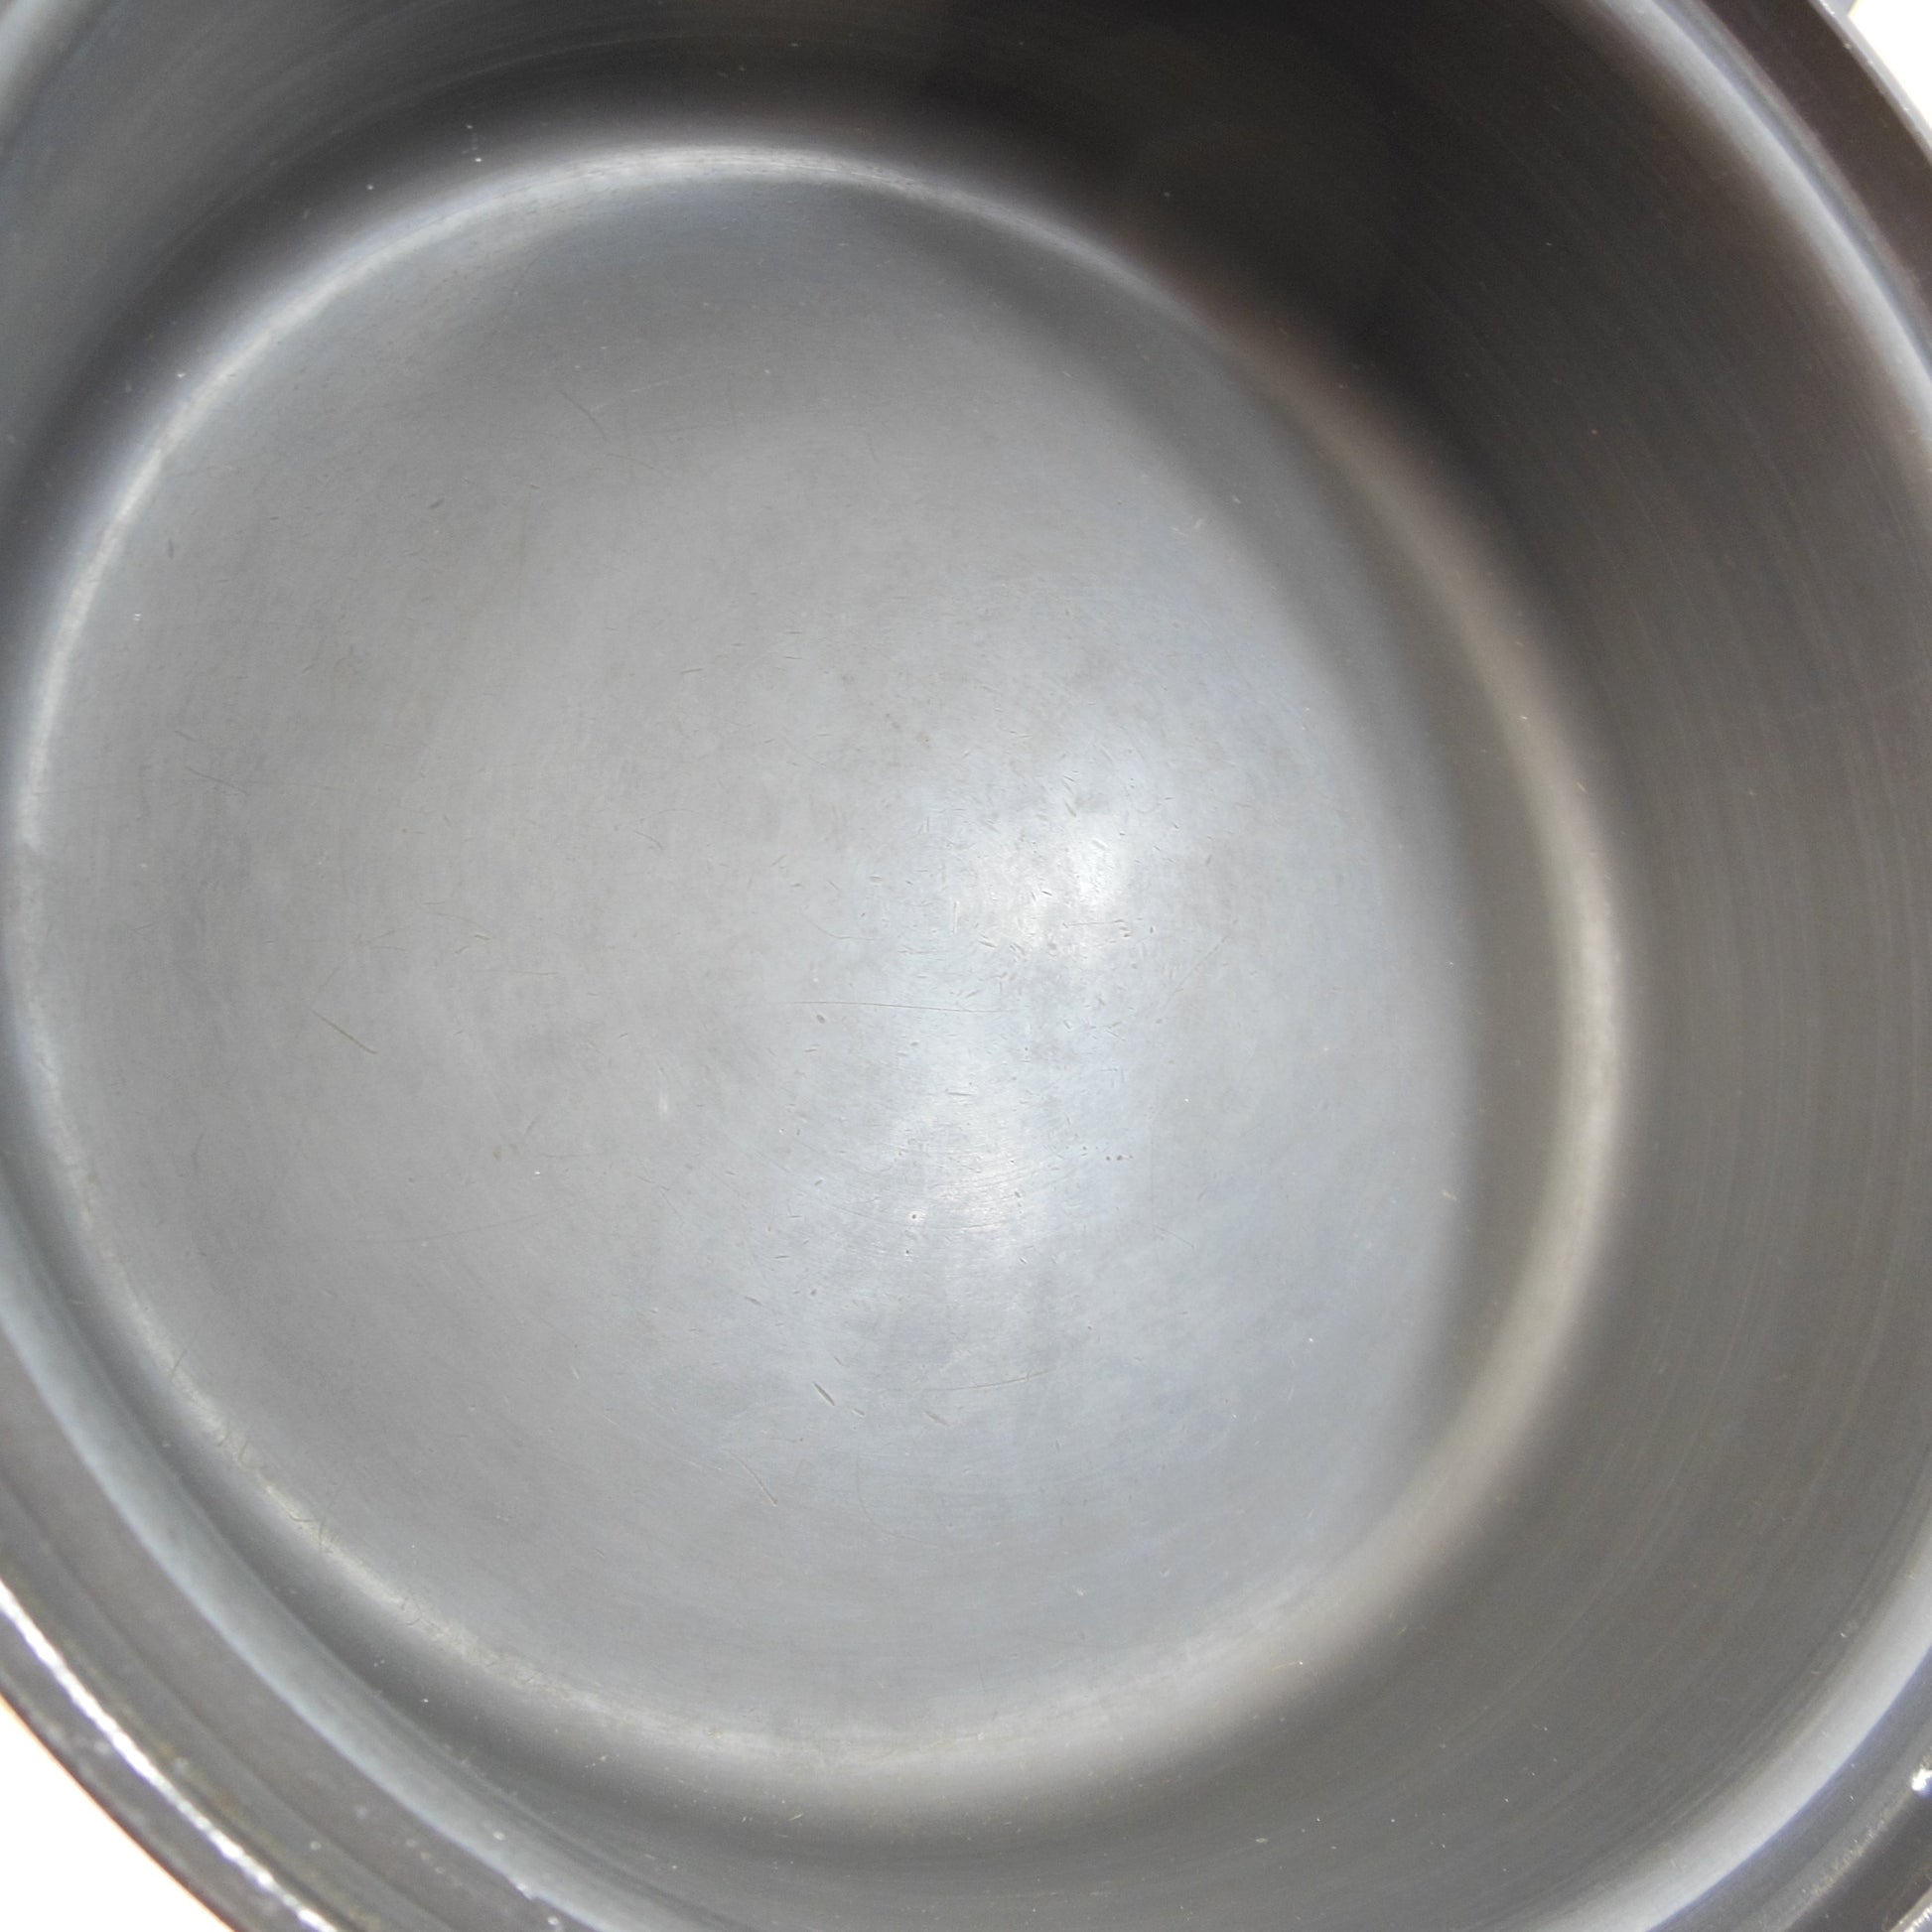 West Bend Miracle Maid Anodized 2 Quart Saucepan & Lid Used